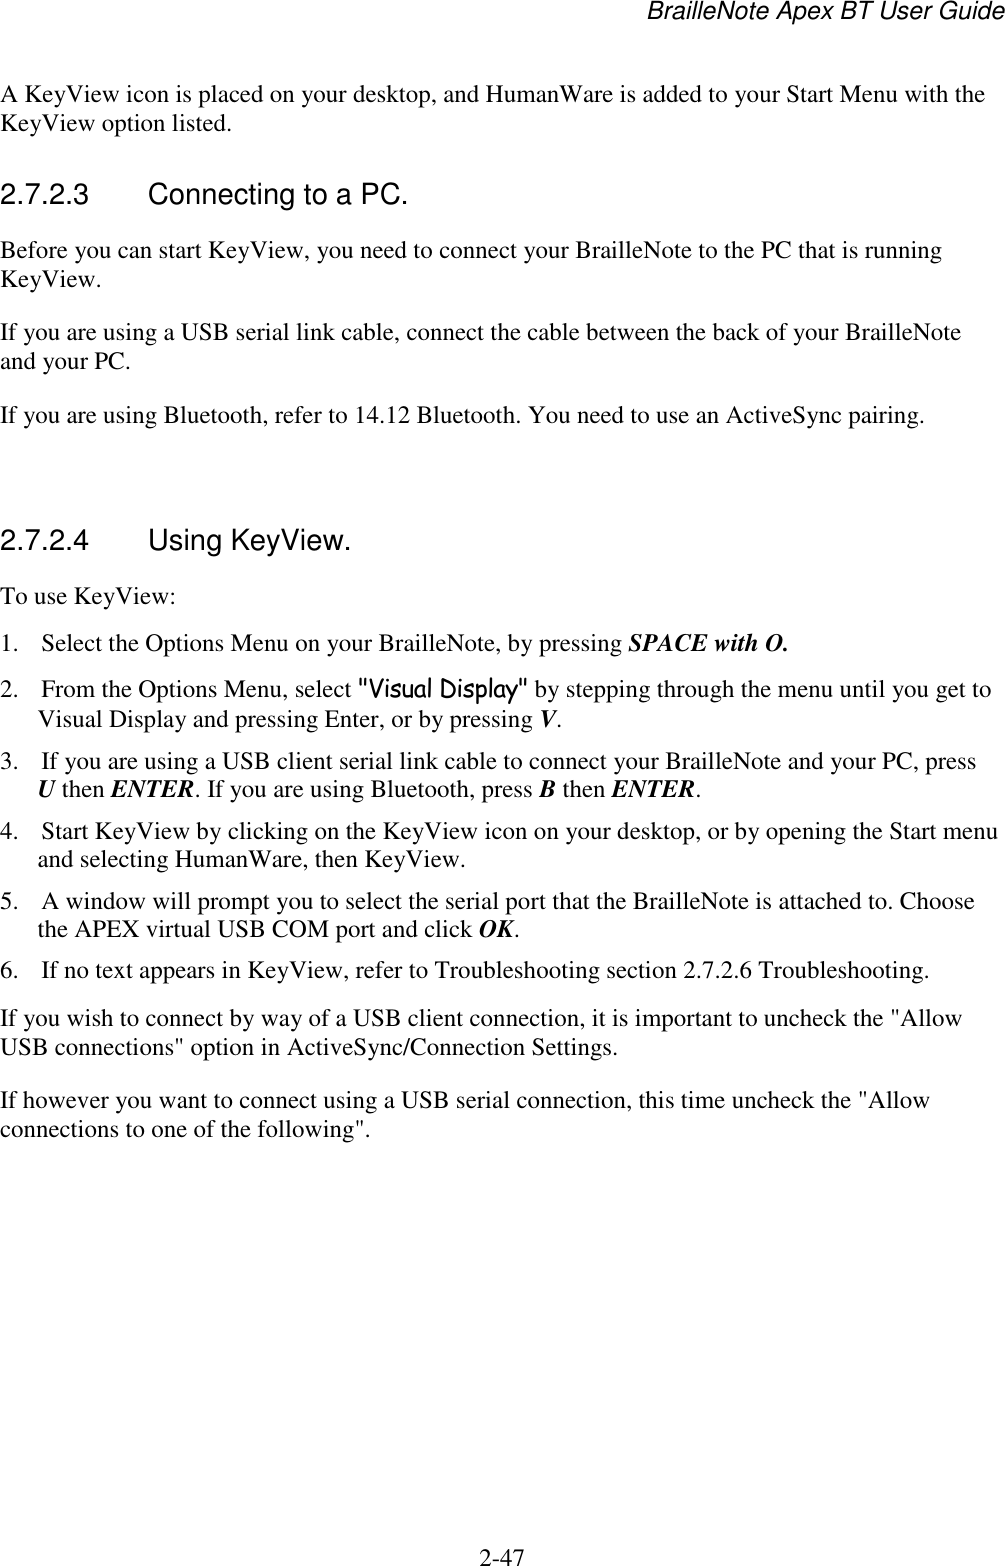 BrailleNote Apex BT User Guide   2-47   A KeyView icon is placed on your desktop, and HumanWare is added to your Start Menu with the KeyView option listed.  2.7.2.3  Connecting to a PC. Before you can start KeyView, you need to connect your BrailleNote to the PC that is running KeyView.  If you are using a USB serial link cable, connect the cable between the back of your BrailleNote and your PC. If you are using Bluetooth, refer to 14.12 Bluetooth. You need to use an ActiveSync pairing.    2.7.2.4  Using KeyView. To use KeyView: 1. Select the Options Menu on your BrailleNote, by pressing SPACE with O. 2. From the Options Menu, select &quot;Visual Display&quot; by stepping through the menu until you get to Visual Display and pressing Enter, or by pressing V. 3. If you are using a USB client serial link cable to connect your BrailleNote and your PC, press U then ENTER. If you are using Bluetooth, press B then ENTER. 4. Start KeyView by clicking on the KeyView icon on your desktop, or by opening the Start menu and selecting HumanWare, then KeyView. 5. A window will prompt you to select the serial port that the BrailleNote is attached to. Choose the APEX virtual USB COM port and click OK. 6. If no text appears in KeyView, refer to Troubleshooting section 2.7.2.6 Troubleshooting. If you wish to connect by way of a USB client connection, it is important to uncheck the &quot;Allow USB connections&quot; option in ActiveSync/Connection Settings. If however you want to connect using a USB serial connection, this time uncheck the &quot;Allow connections to one of the following&quot;.   